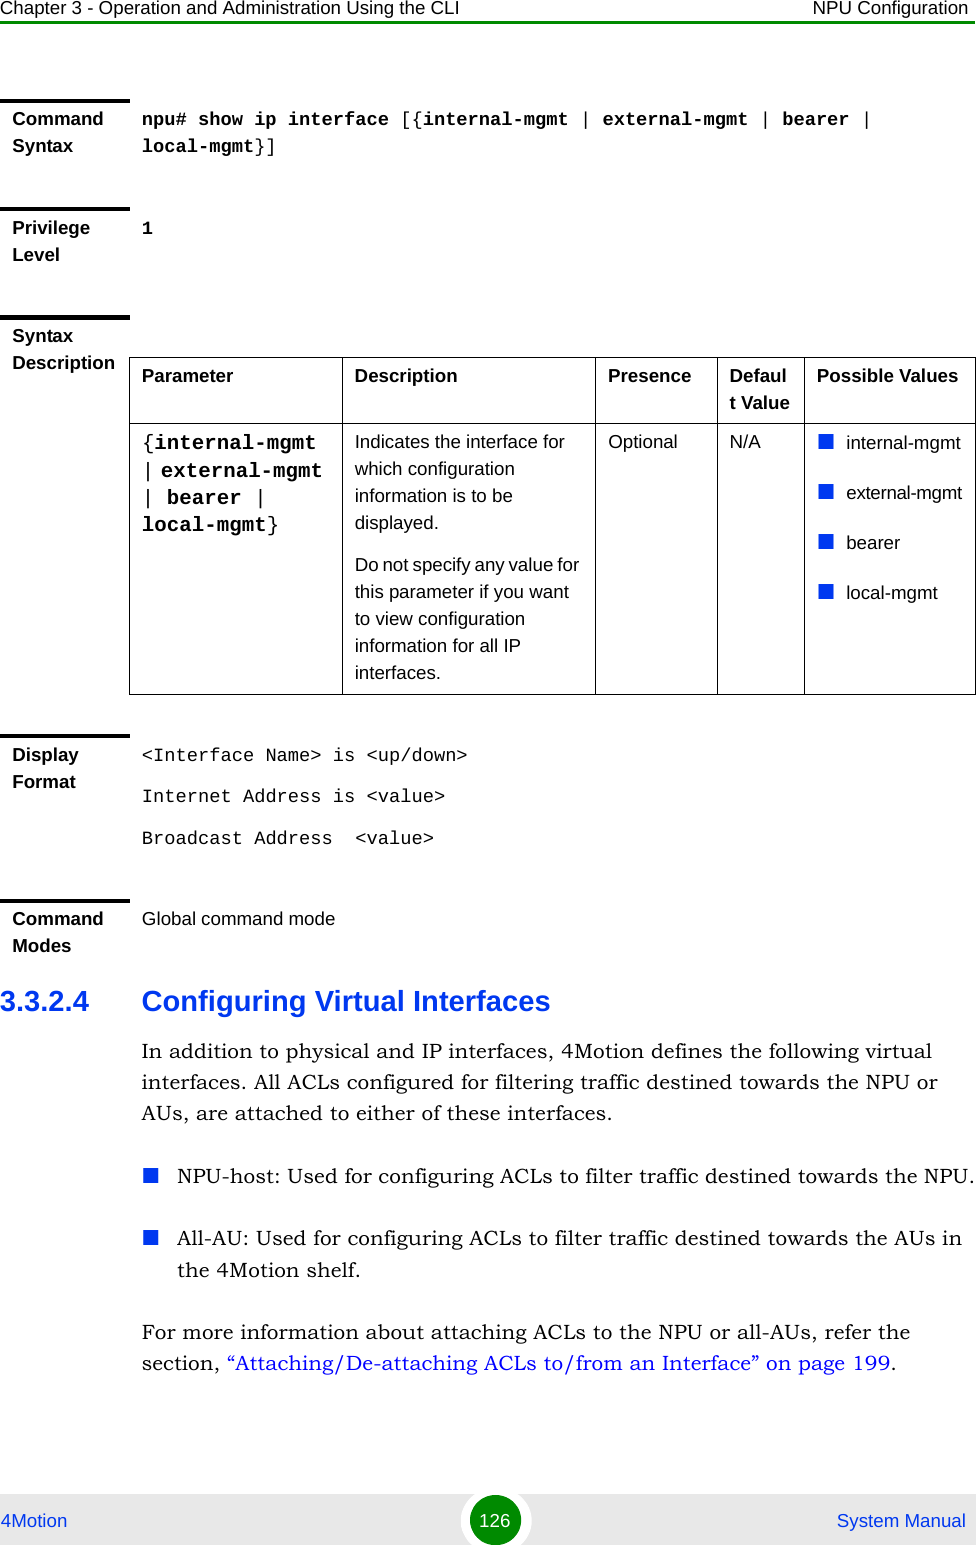 Chapter 3 - Operation and Administration Using the CLI NPU Configuration4Motion 126  System Manual3.3.2.4 Configuring Virtual InterfacesIn addition to physical and IP interfaces, 4Motion defines the following virtual interfaces. All ACLs configured for filtering traffic destined towards the NPU or AUs, are attached to either of these interfaces.NPU-host: Used for configuring ACLs to filter traffic destined towards the NPU.All-AU: Used for configuring ACLs to filter traffic destined towards the AUs in the 4Motion shelf. For more information about attaching ACLs to the NPU or all-AUs, refer the section, “Attaching/De-attaching ACLs to/from an Interface” on page 199.Command Syntaxnpu# show ip interface [{internal-mgmt | external-mgmt | bearer | local-mgmt}]Privilege Level1Syntax Description Parameter Description Presence Default ValuePossible Values{internal-mgmt | external-mgmt | bearer | local-mgmt}Indicates the interface for which configuration information is to be displayed.Do not specify any value for this parameter if you want to view configuration information for all IP interfaces.Optional N/A internal-mgmtexternal-mgmtbearerlocal-mgmtDisplay Format&lt;Interface Name&gt; is &lt;up/down&gt; Internet Address is &lt;value&gt;Broadcast Address  &lt;value&gt;Command ModesGlobal command mode